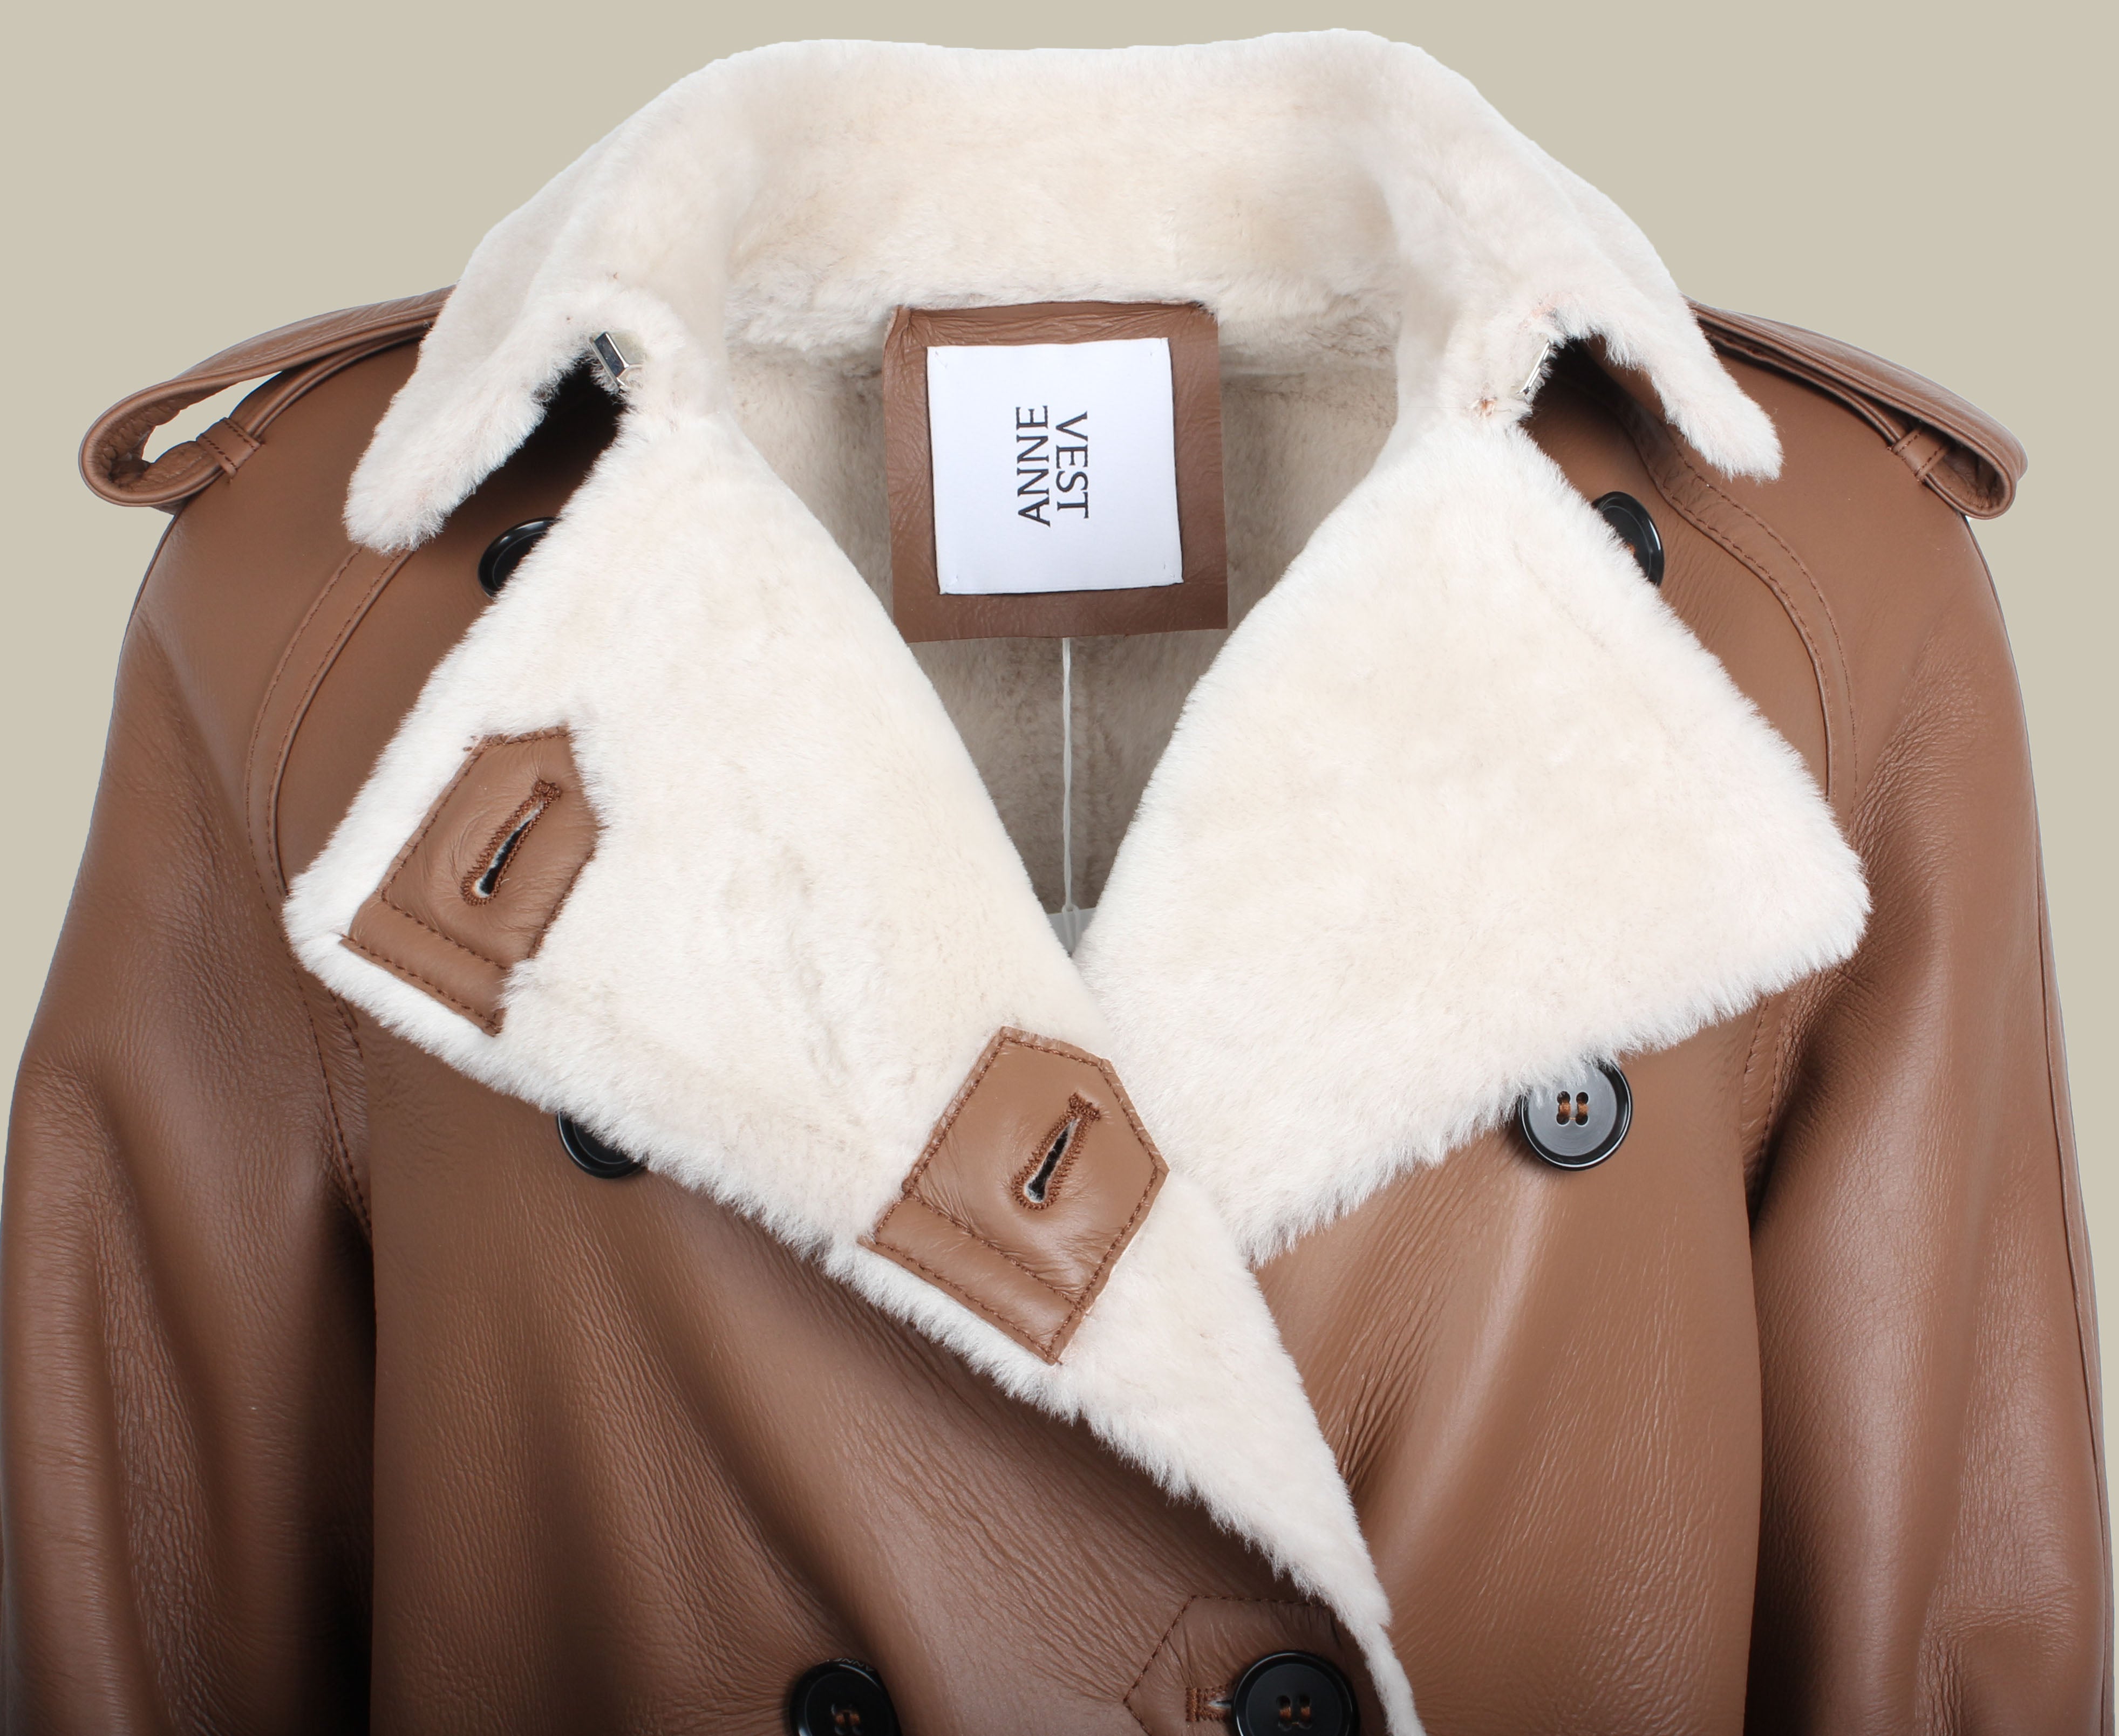 STELLA Shearling Leather Trench Coat